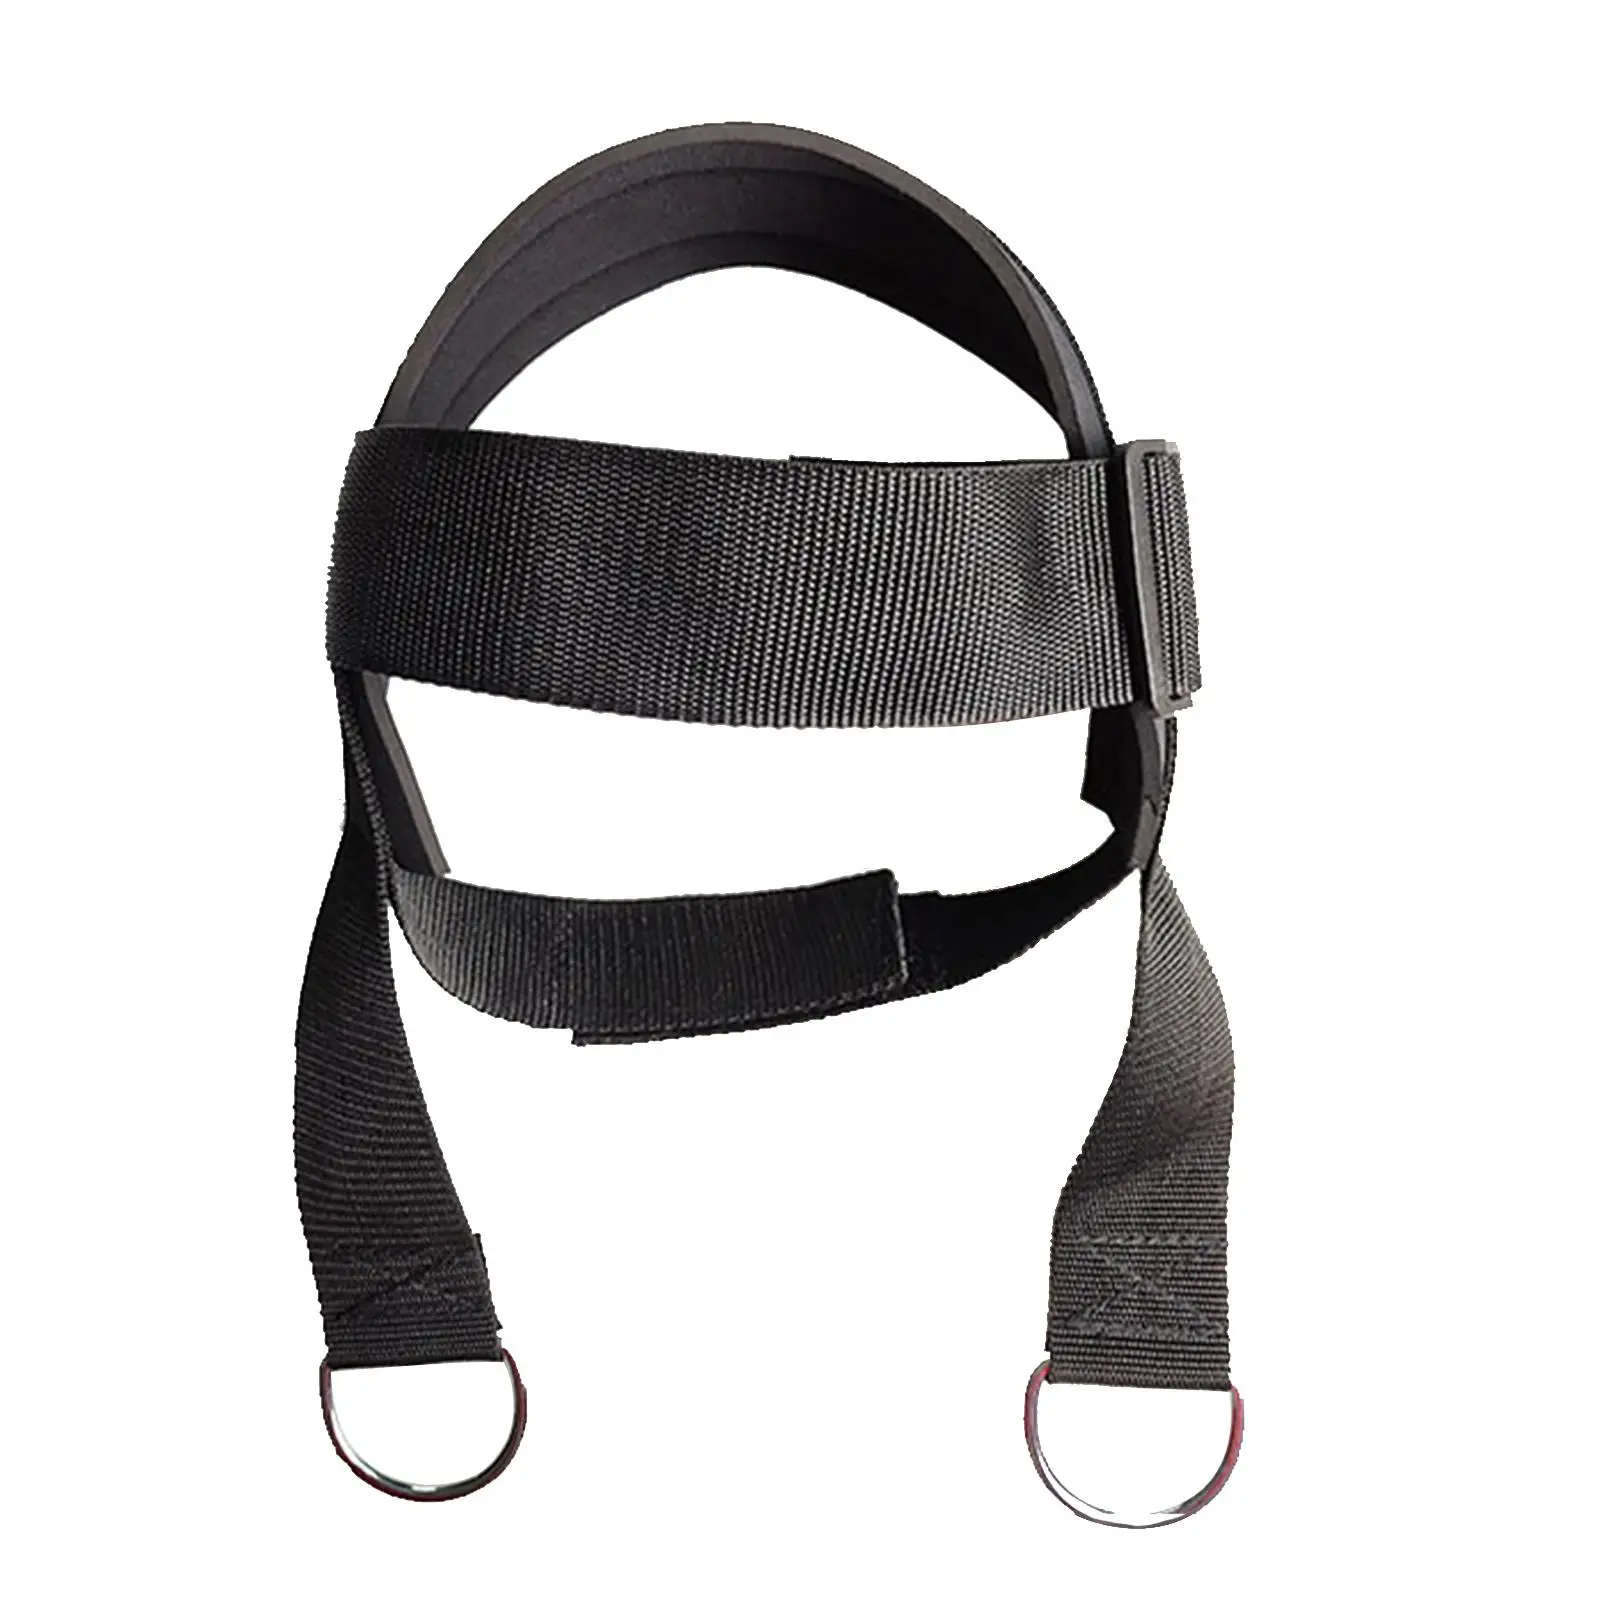 Weight Lifting Wrestling with Metal Loop Equipment Home Head Neck Harness